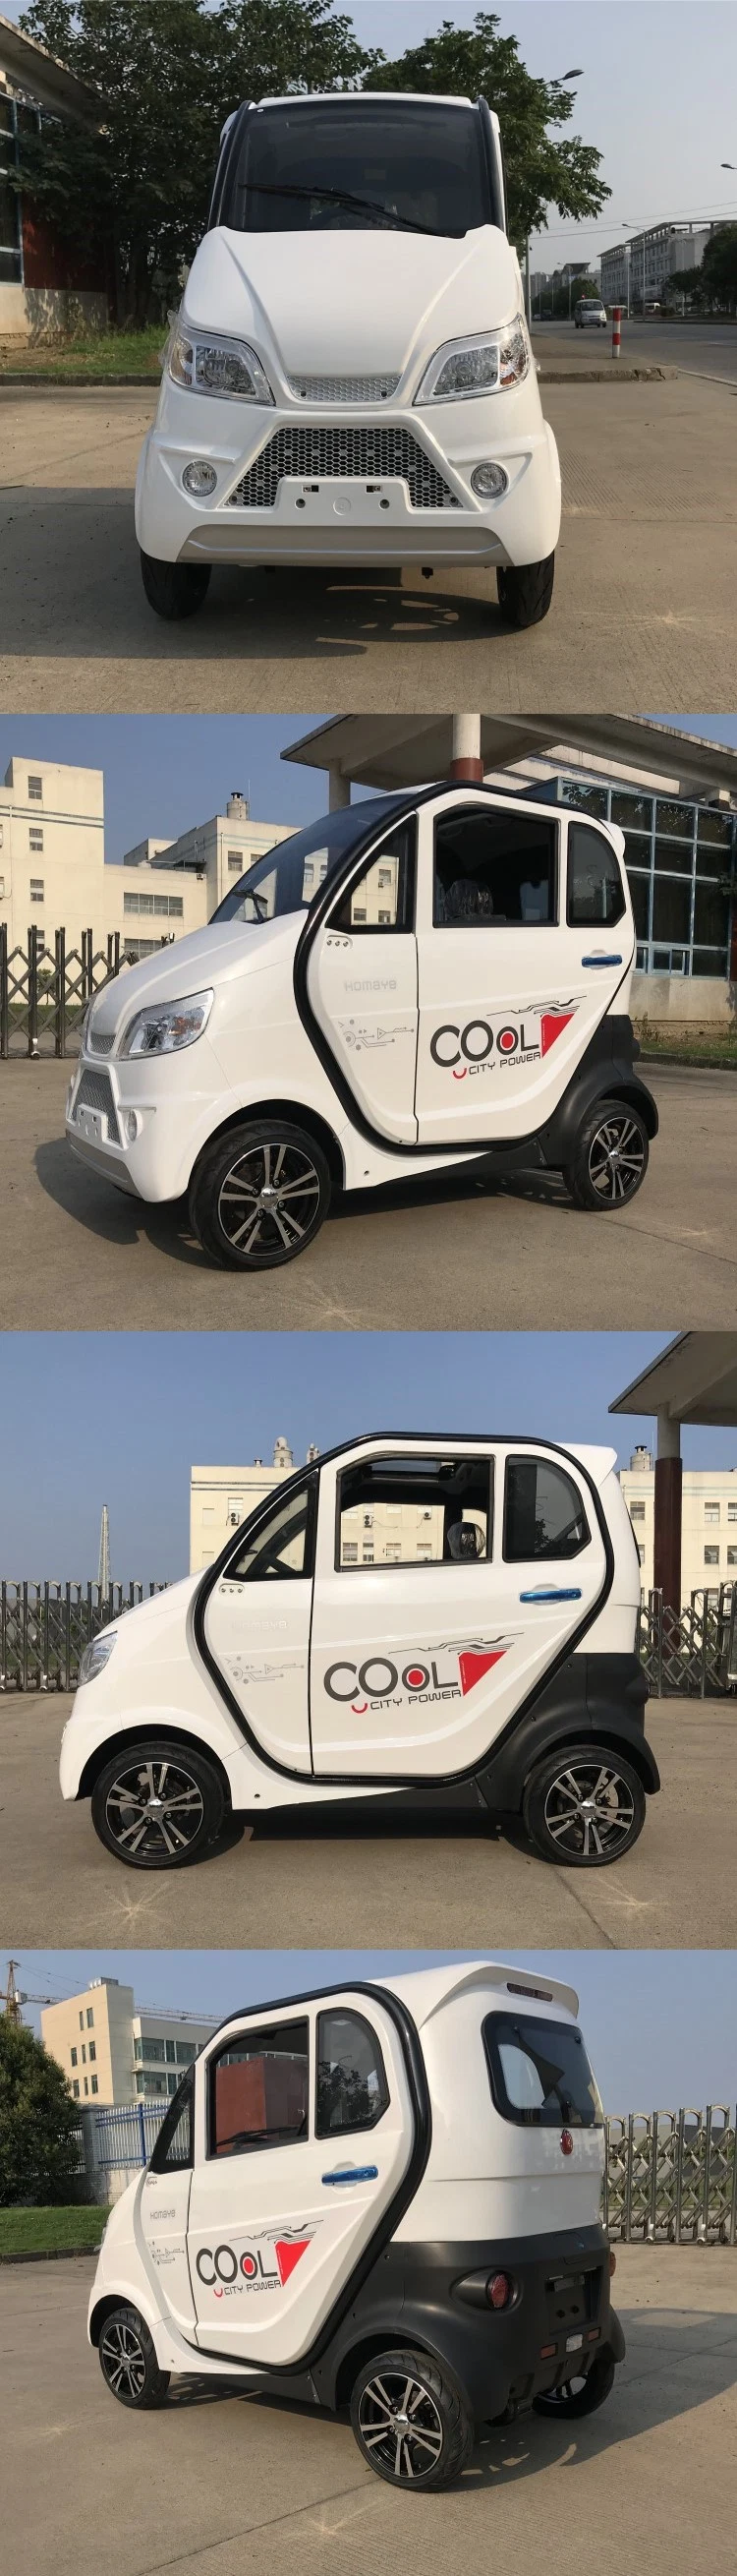 Adult Four-Wheel Enclosed Electric Car Equipped with 1200W Motor 45ah Lead-Acid Battery